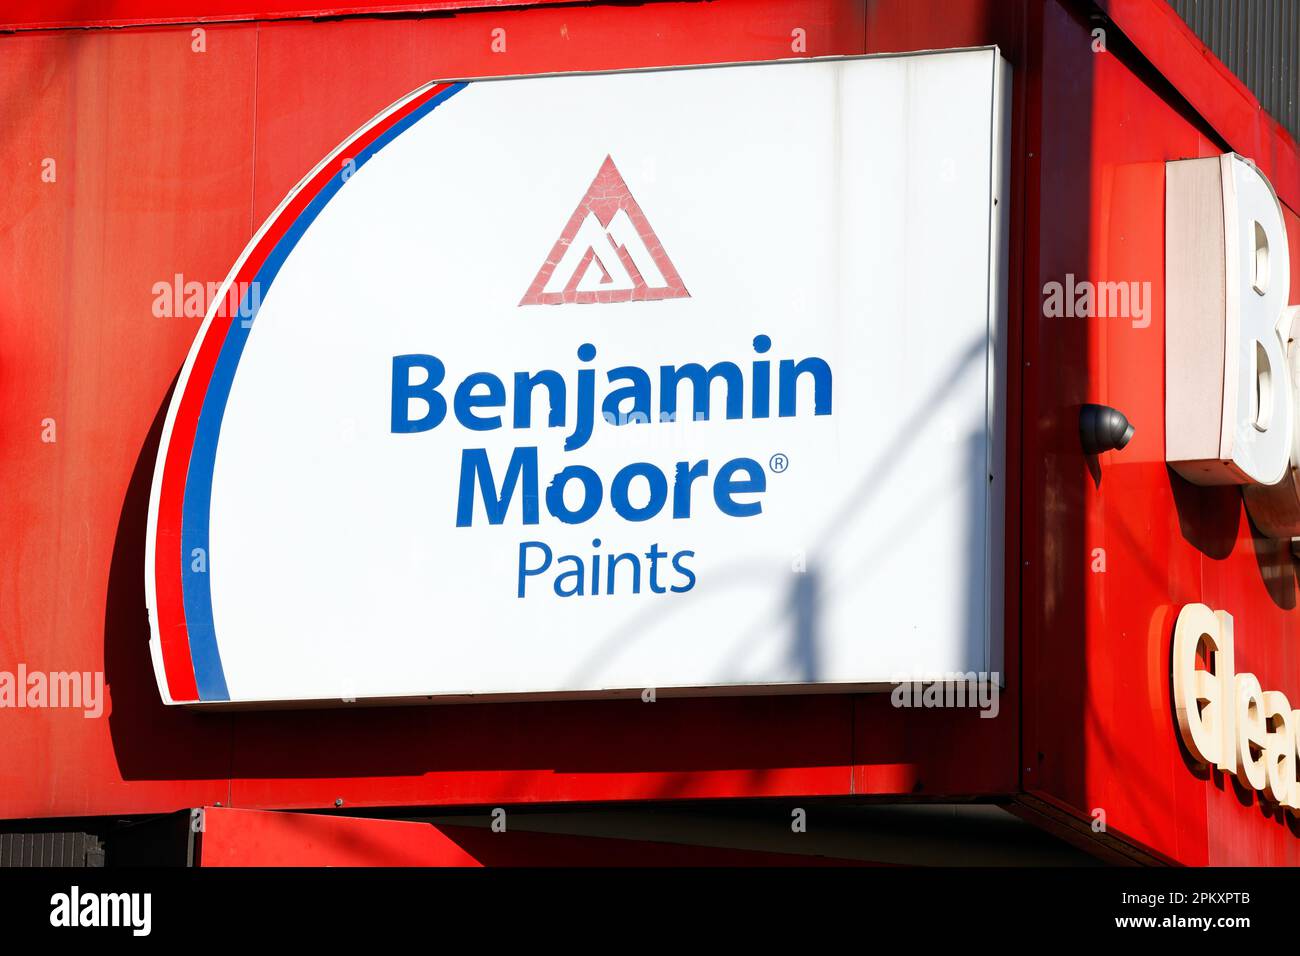 Benjamin Moore Paints signage on the awning of a paint store Stock Photo